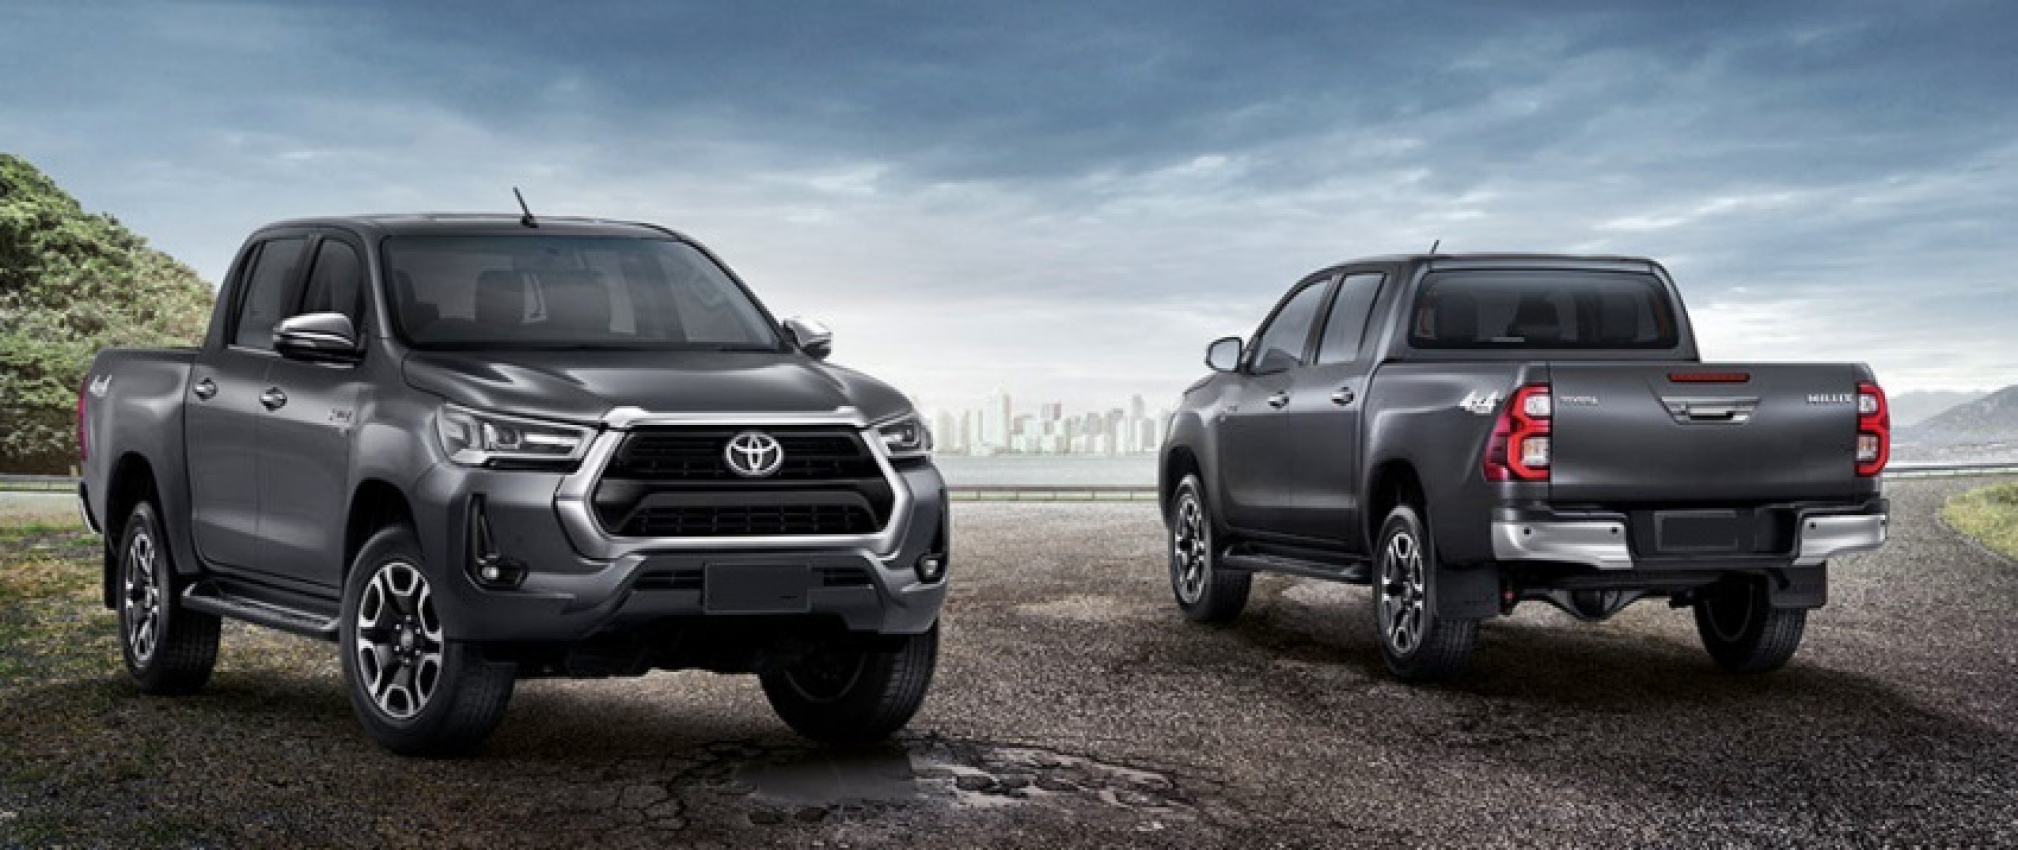 autos, cars, toyota, hilux prices, new hilux, toyota hilux, toyota safety sense, umw toyota motor, confirmed prices for new toyota hilux range announced